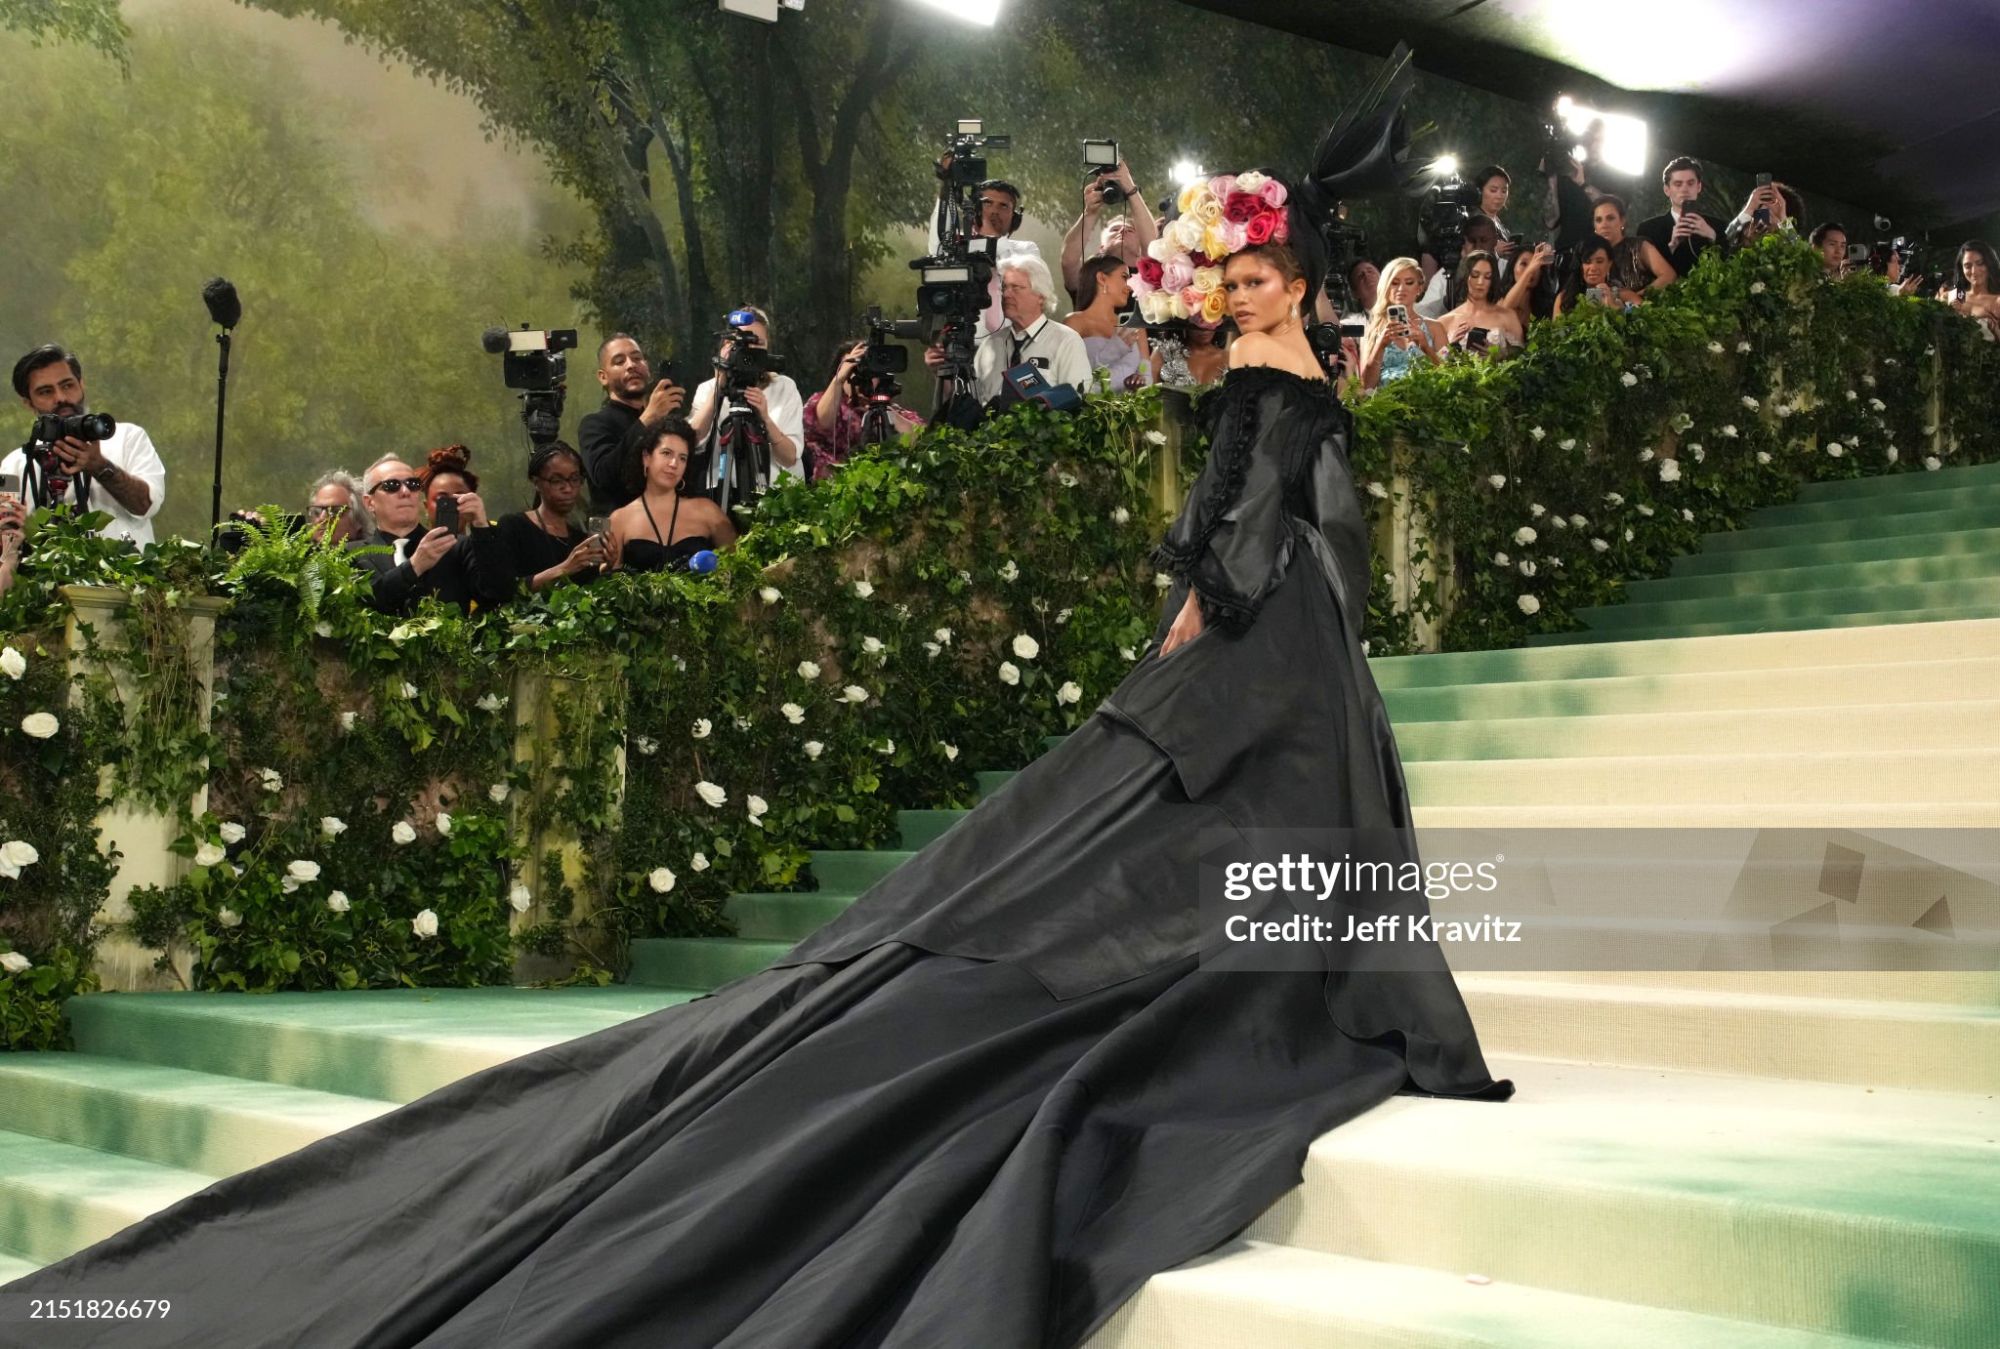 gettyimages-2151826679-2048x2048.jpg